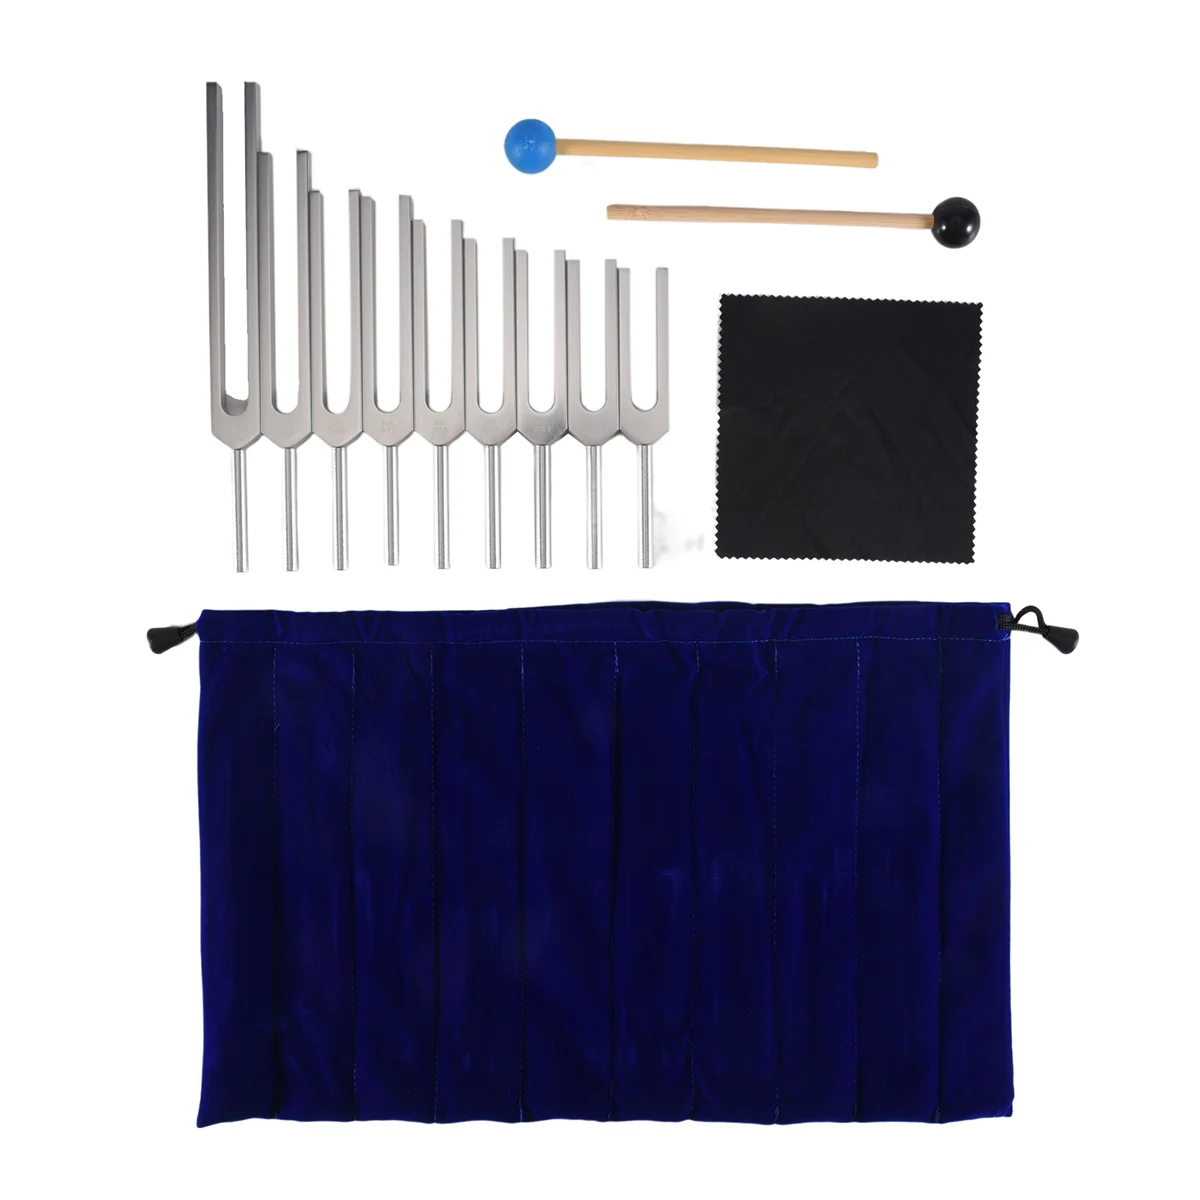 

Tuning Fork Set - 9 Tuning Forks for Healing Chakra,Sound Therapy,Keep Body,Mind and Spirit in Perfect Harmony- Silver